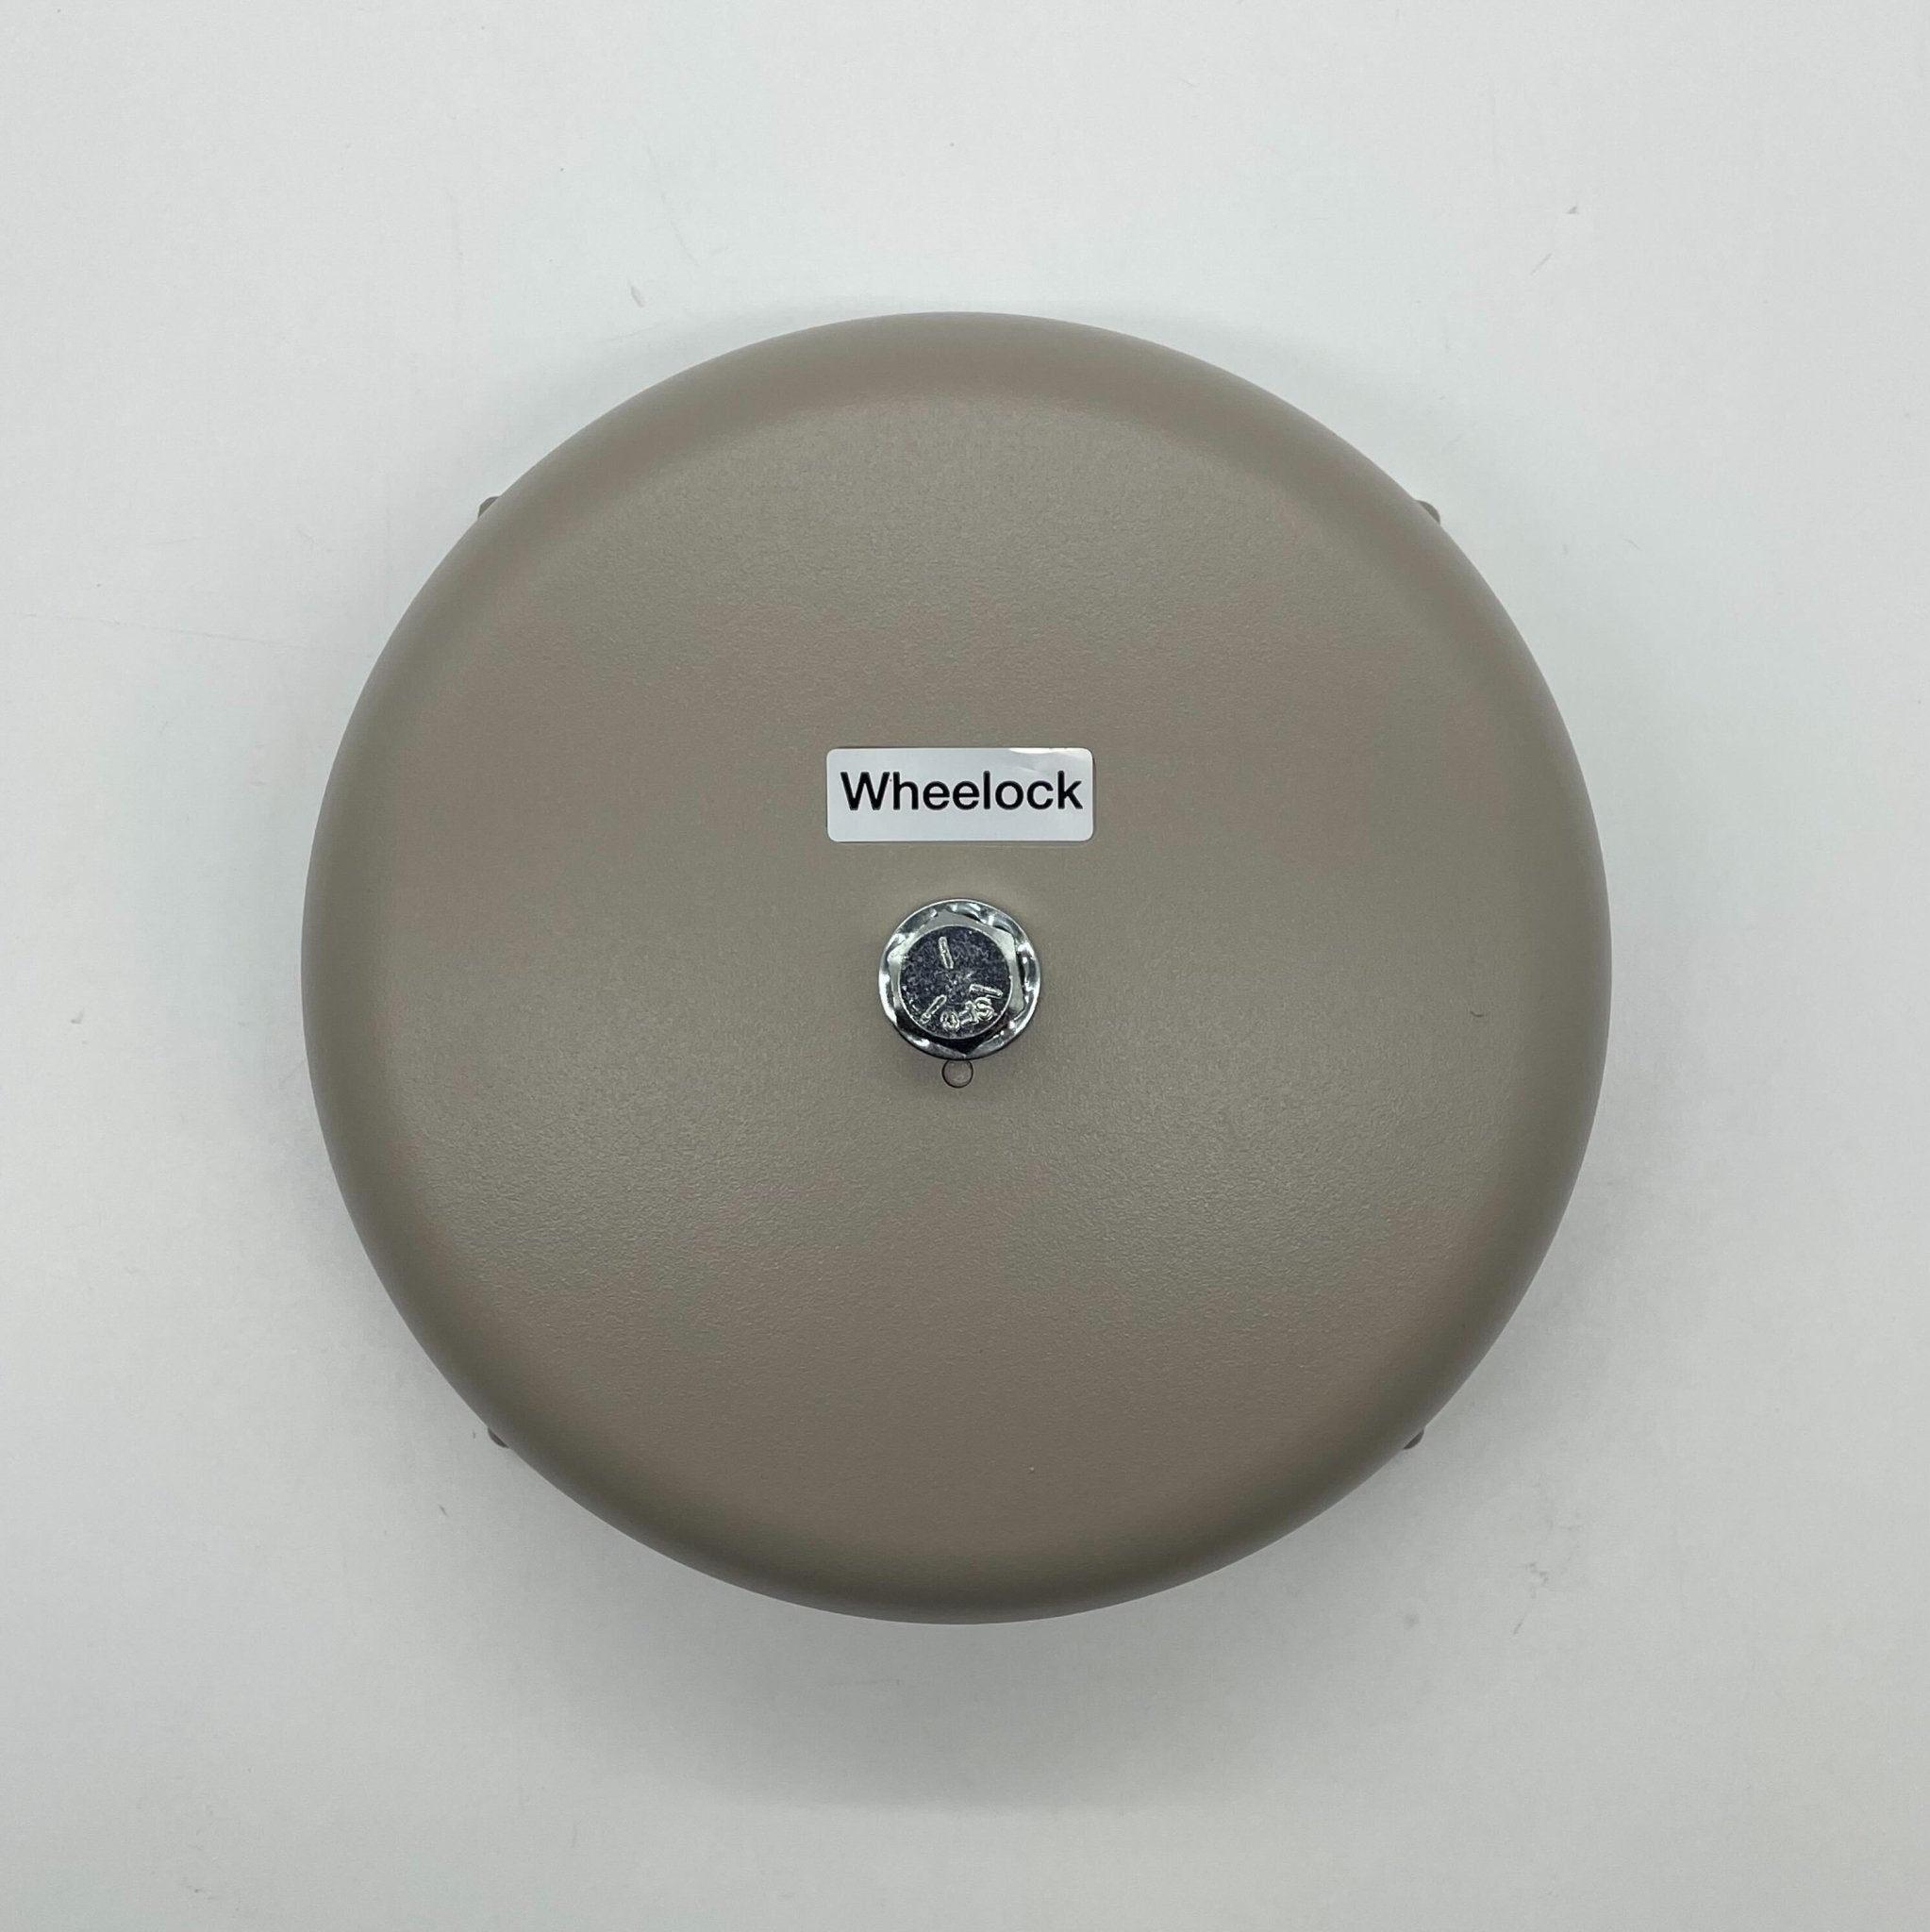 Wheelock MB-G6-24-S - The Fire Alarm Supplier